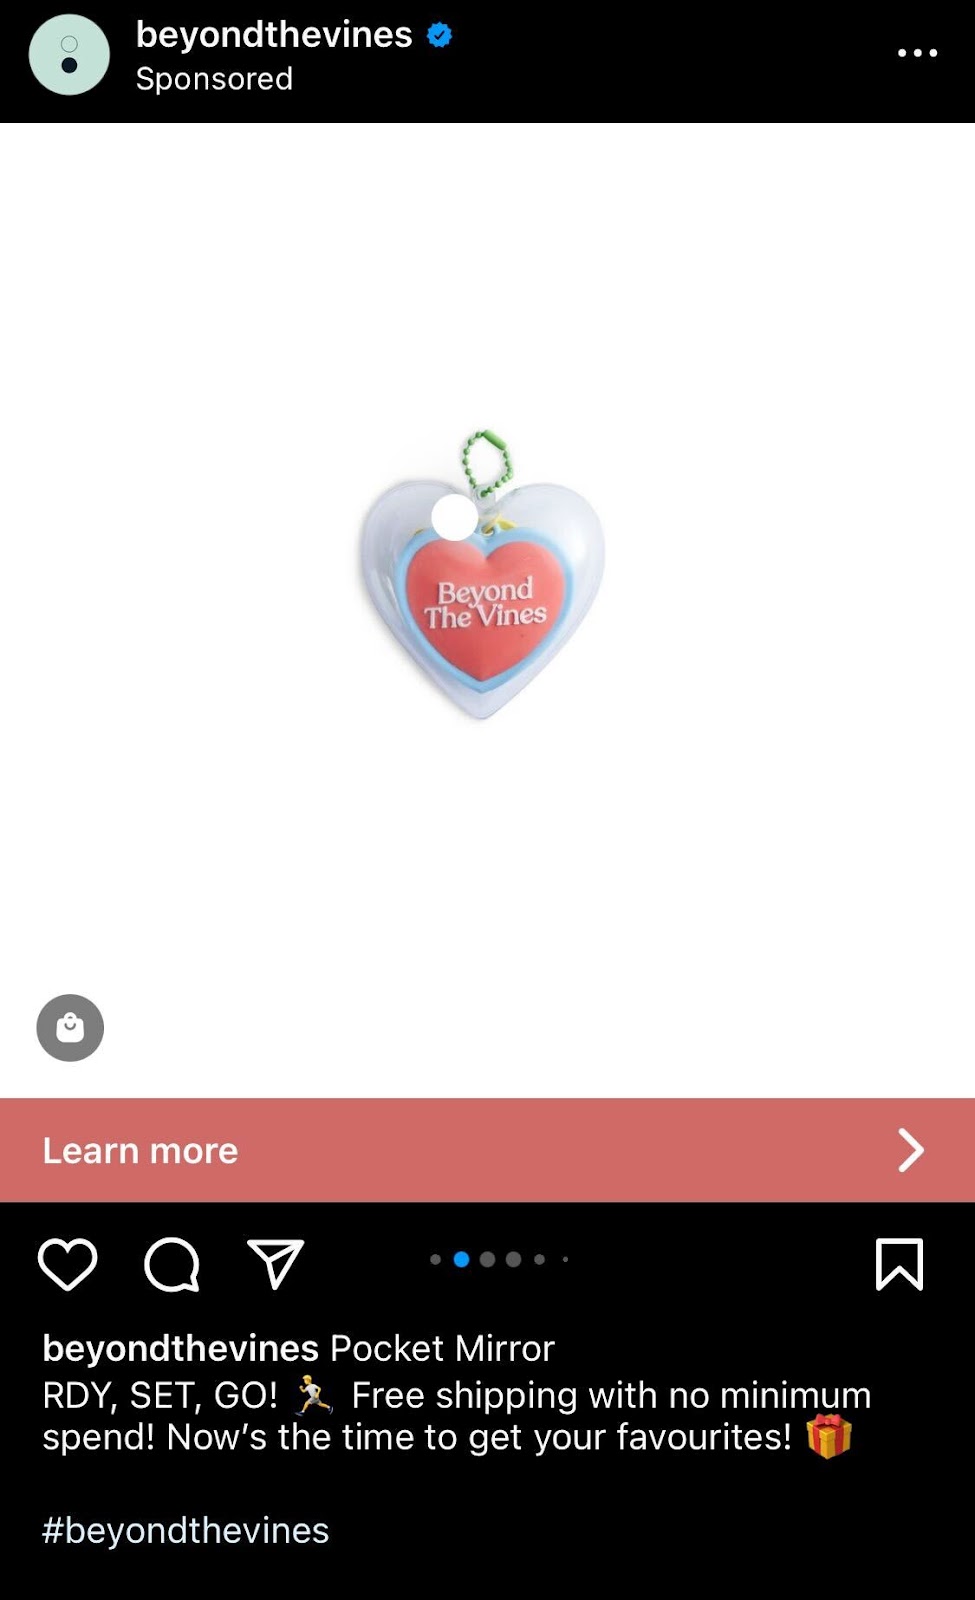 Carousel ad on Instagram from a retail brand